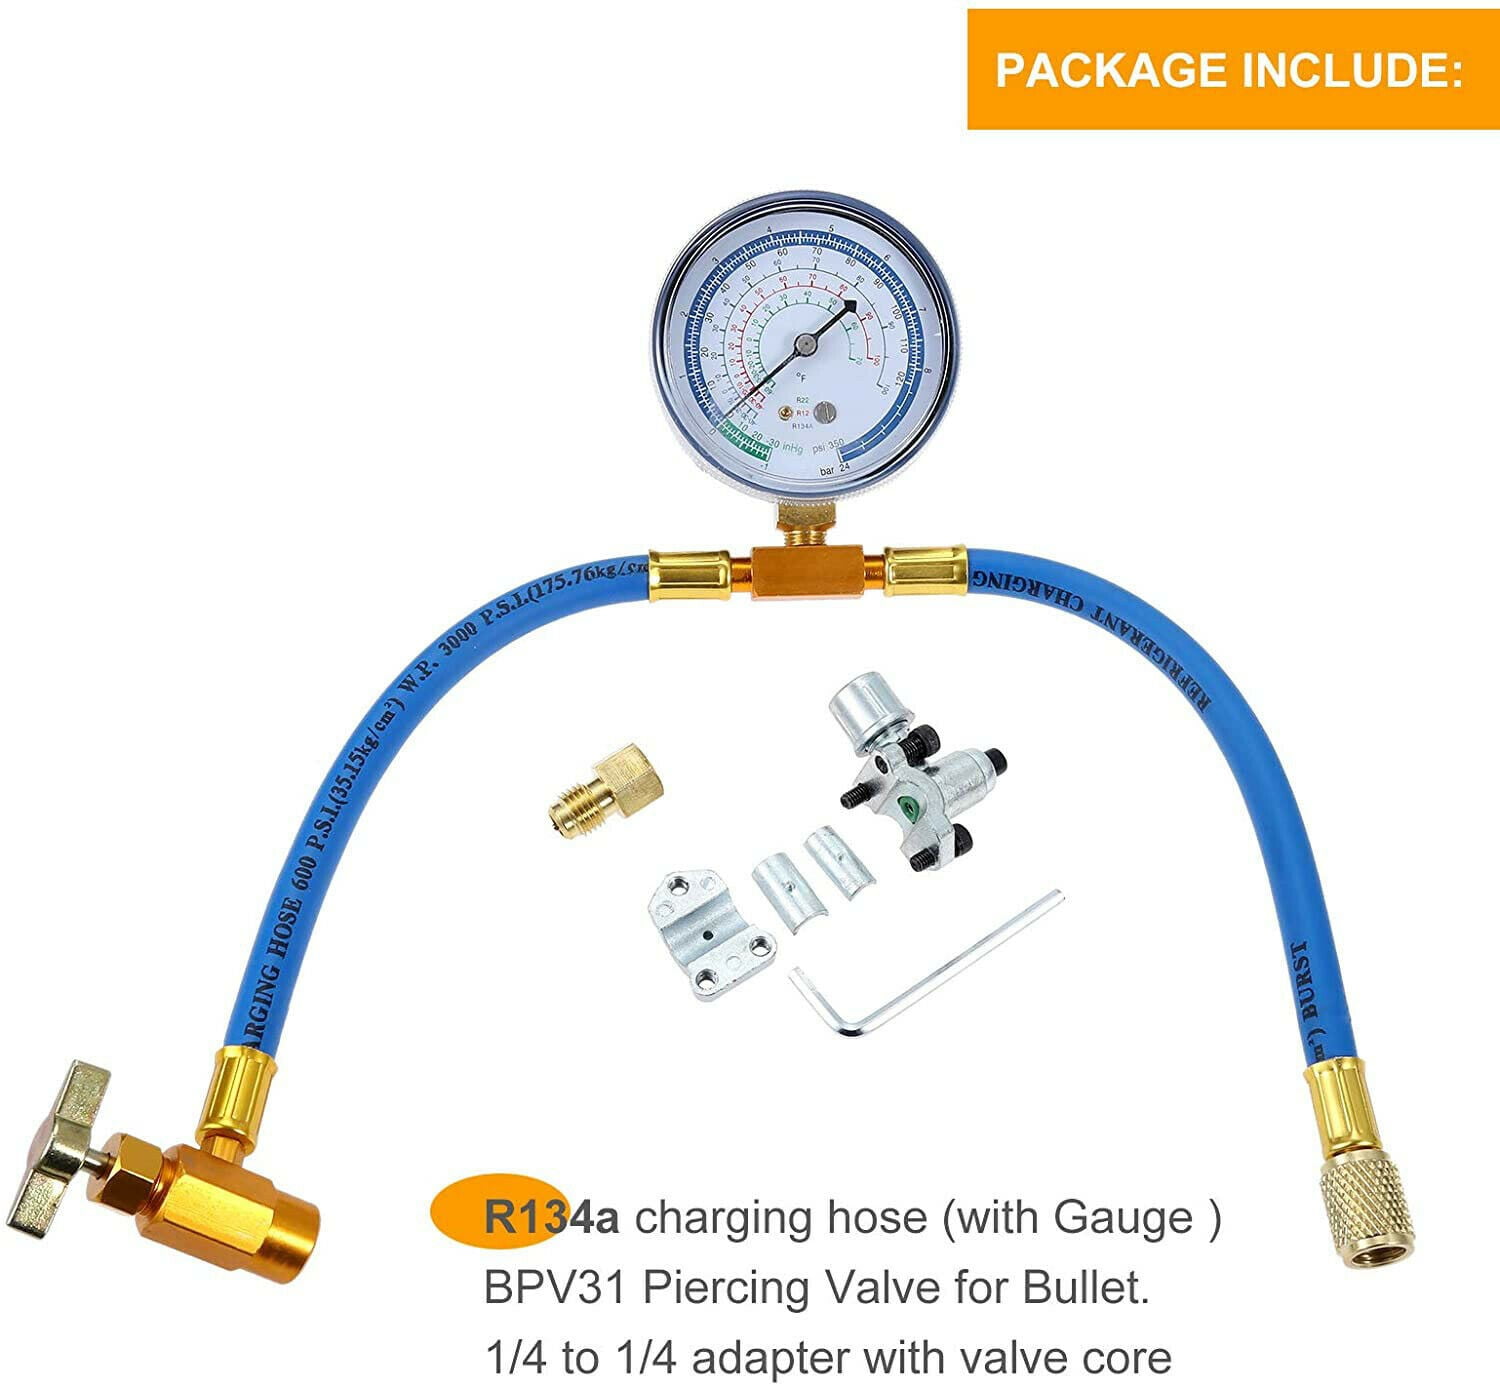 3 Pieces BPV31 Bullet Piercing Tap Valve Kits U-Charging Hose Refrigerant Can Tap with Gauge R134a Can to R12/R22 Port AC 1/2 Replace for AP4502525 BPV31D GPV14 GPV31 GPV38 GPV56 MPV31 